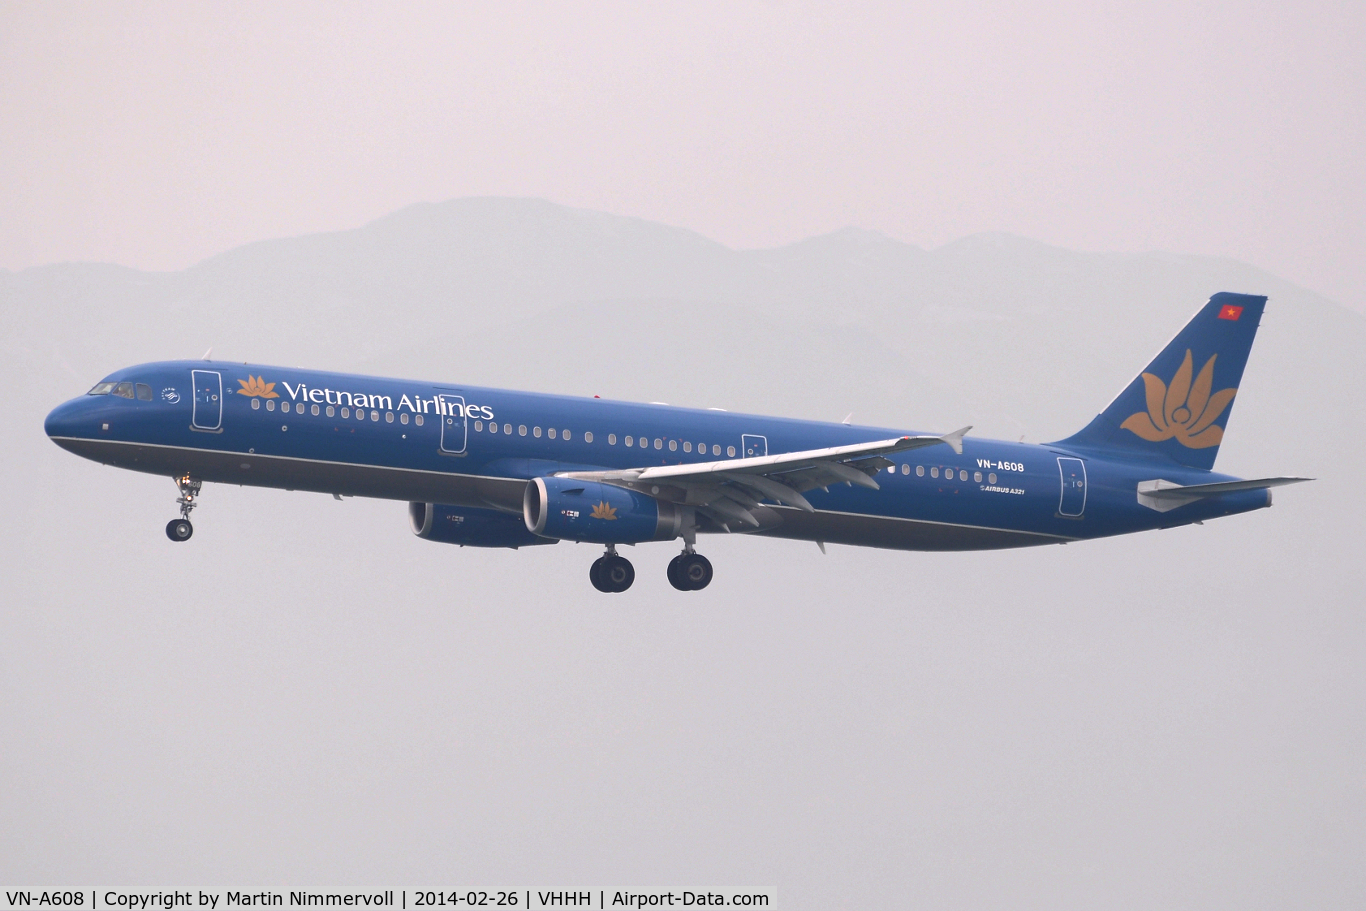 VN-A608, 2013 Airbus A321-231 C/N 5916, Vietnam Airlines